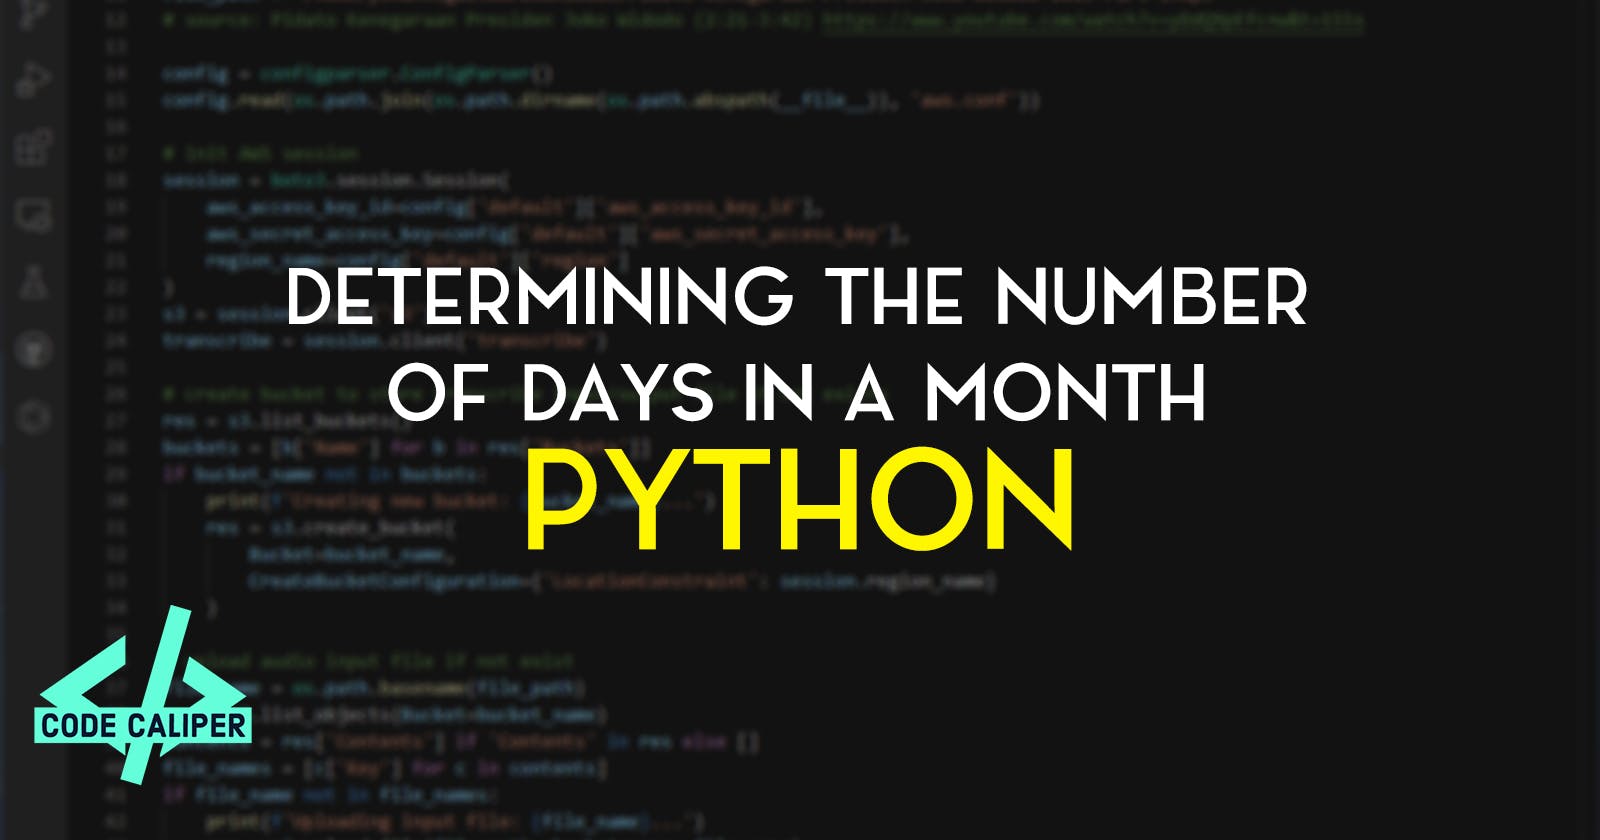 Determining the Number of Days in a Month with Python